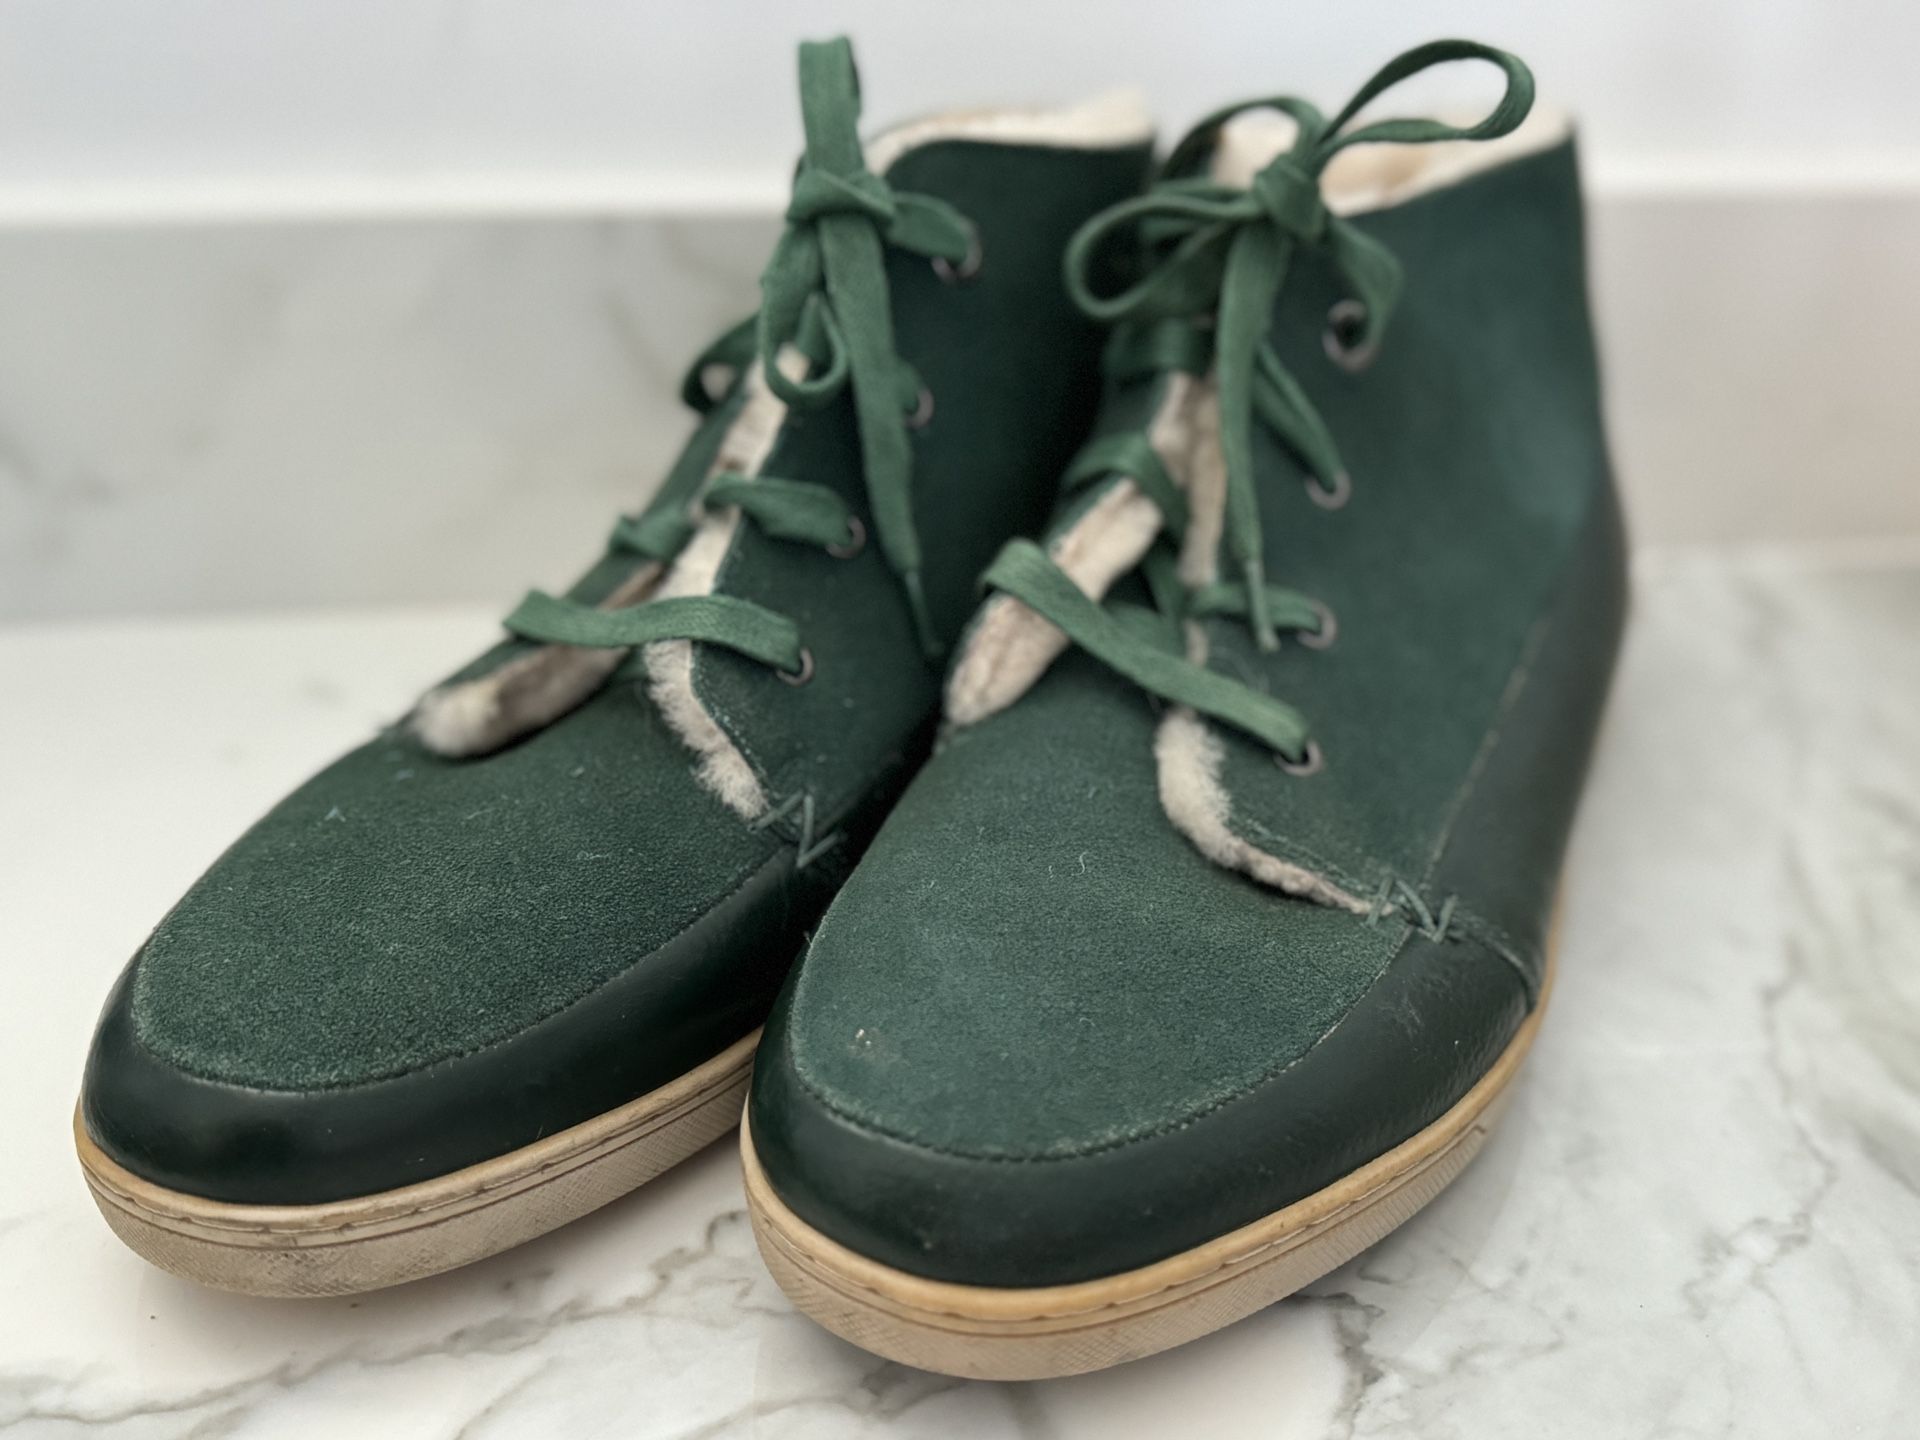 Bugatchi Green Leather/ Suede Chukka Ankle Boots Fur Lined Size 10.5